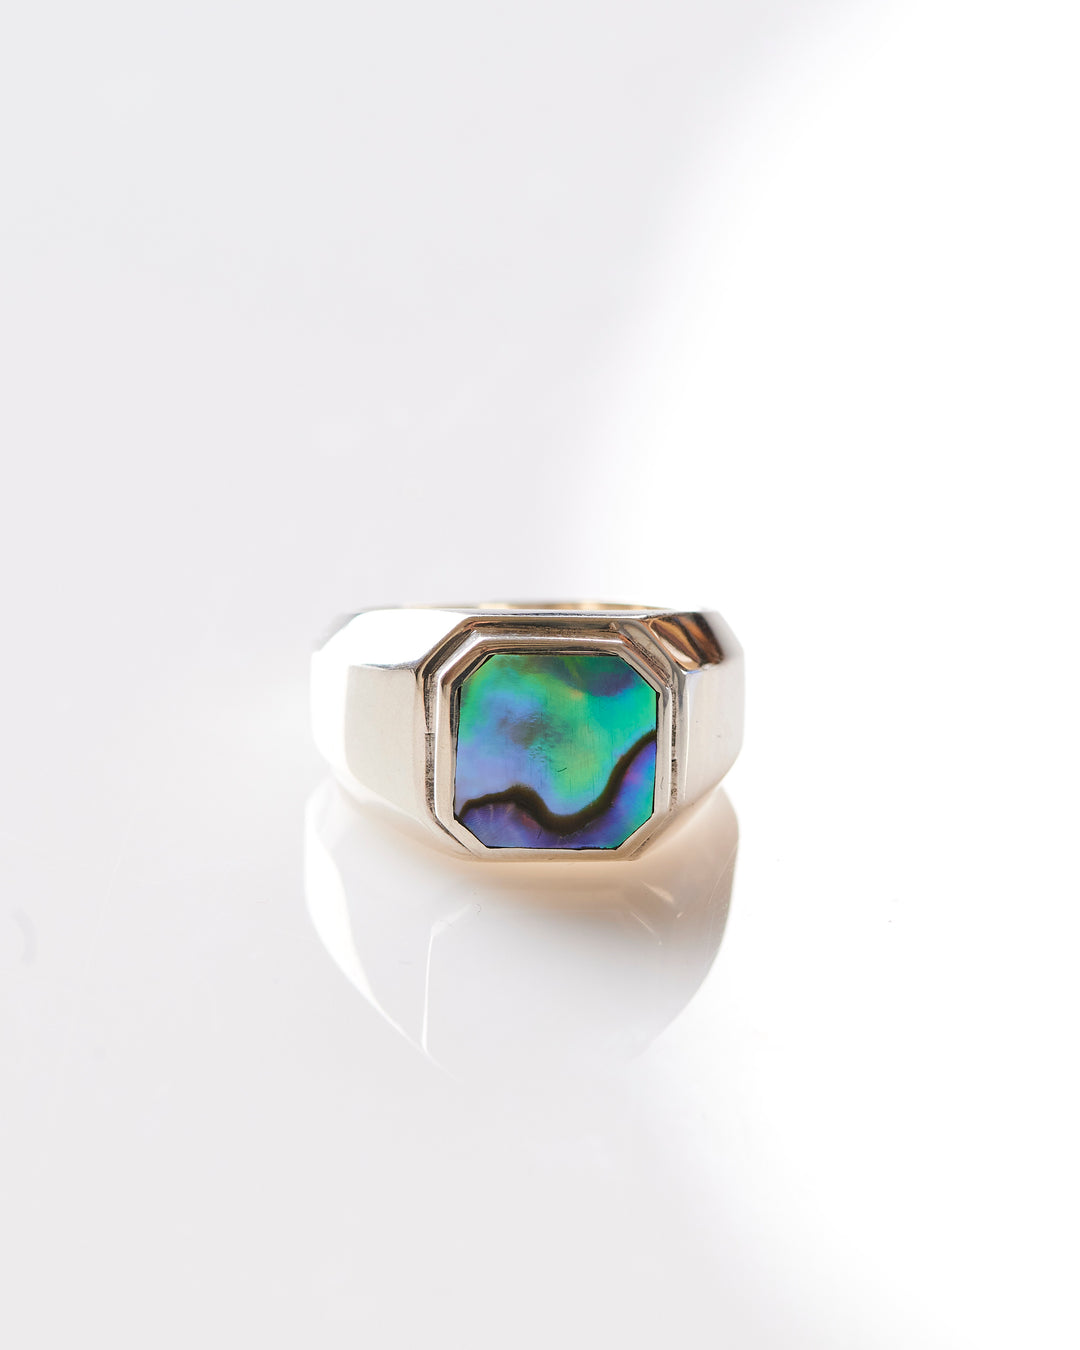 Maple Duppy Signet Ring Silver 925 / Abalone Shell